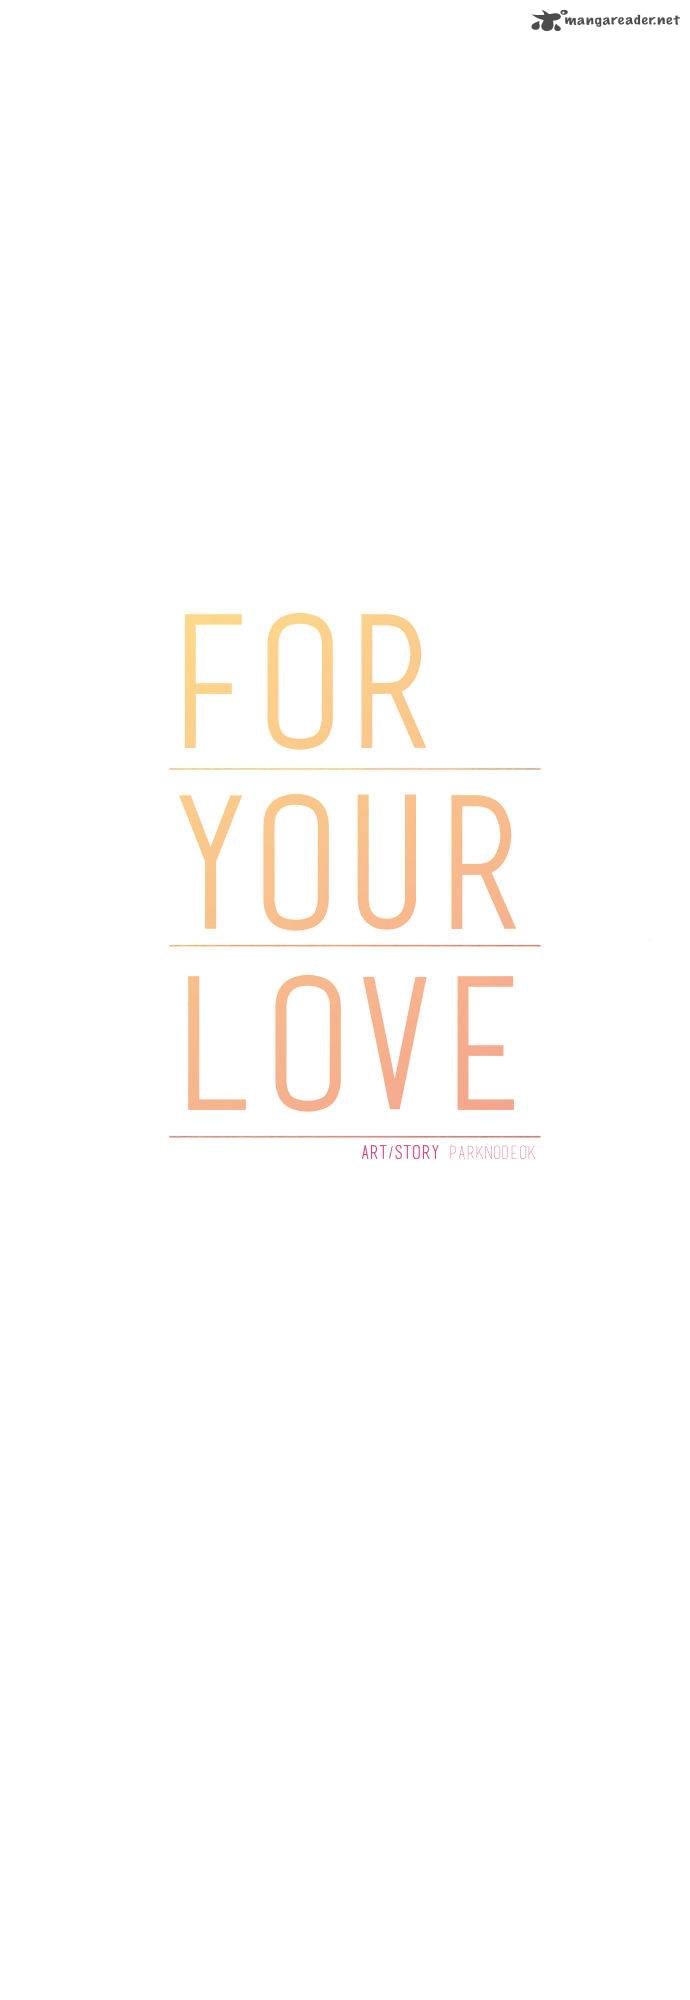 for_your_love_13_12